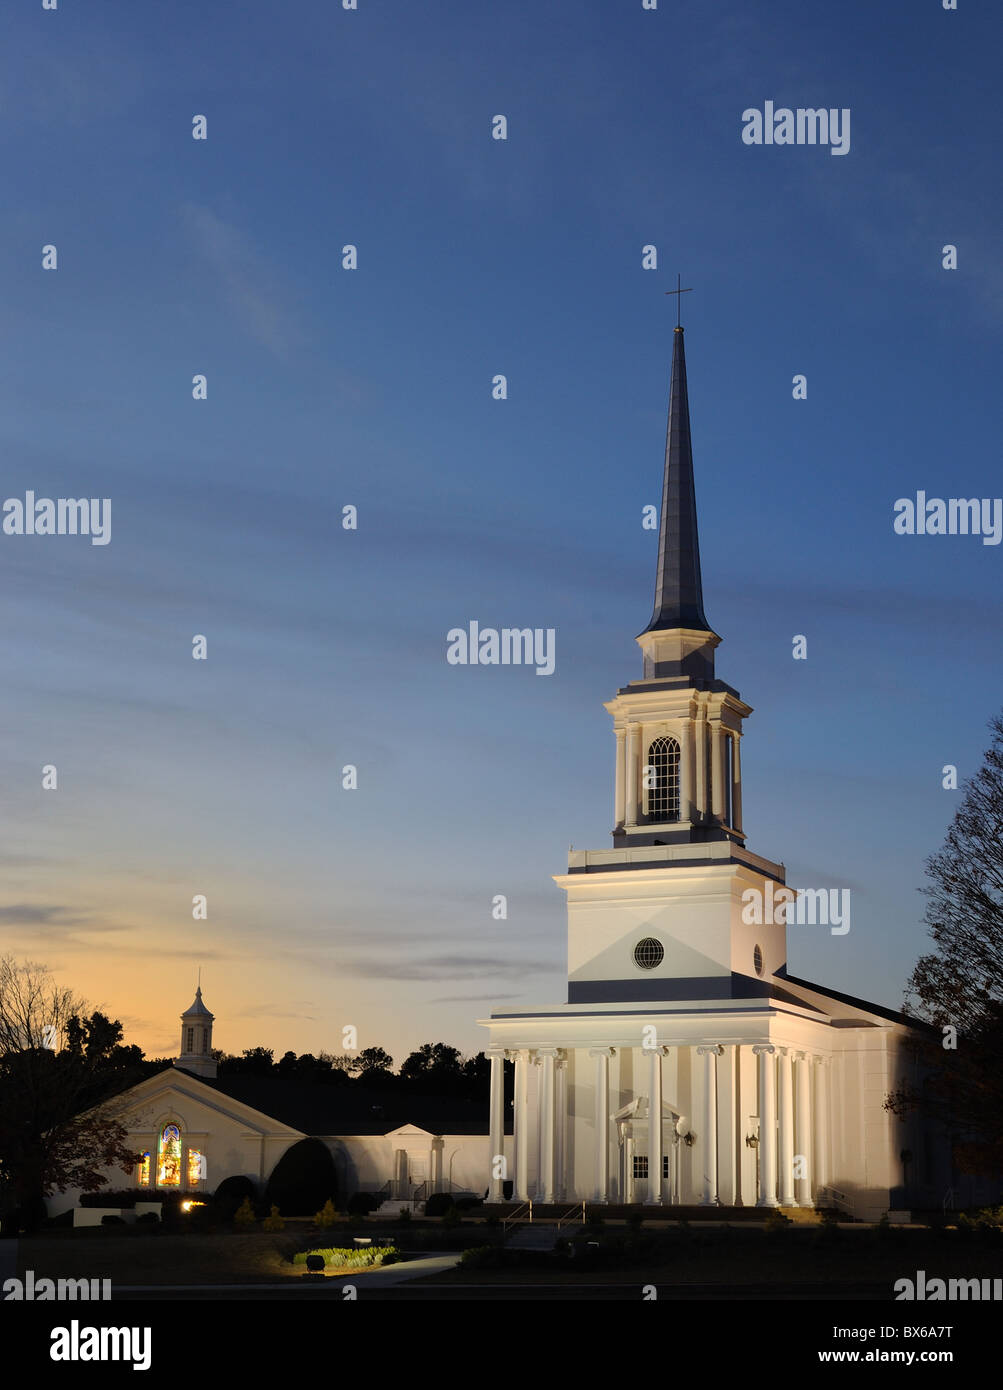 Steeple of a southern Baptist Church in rural surroundings. Stock Photo